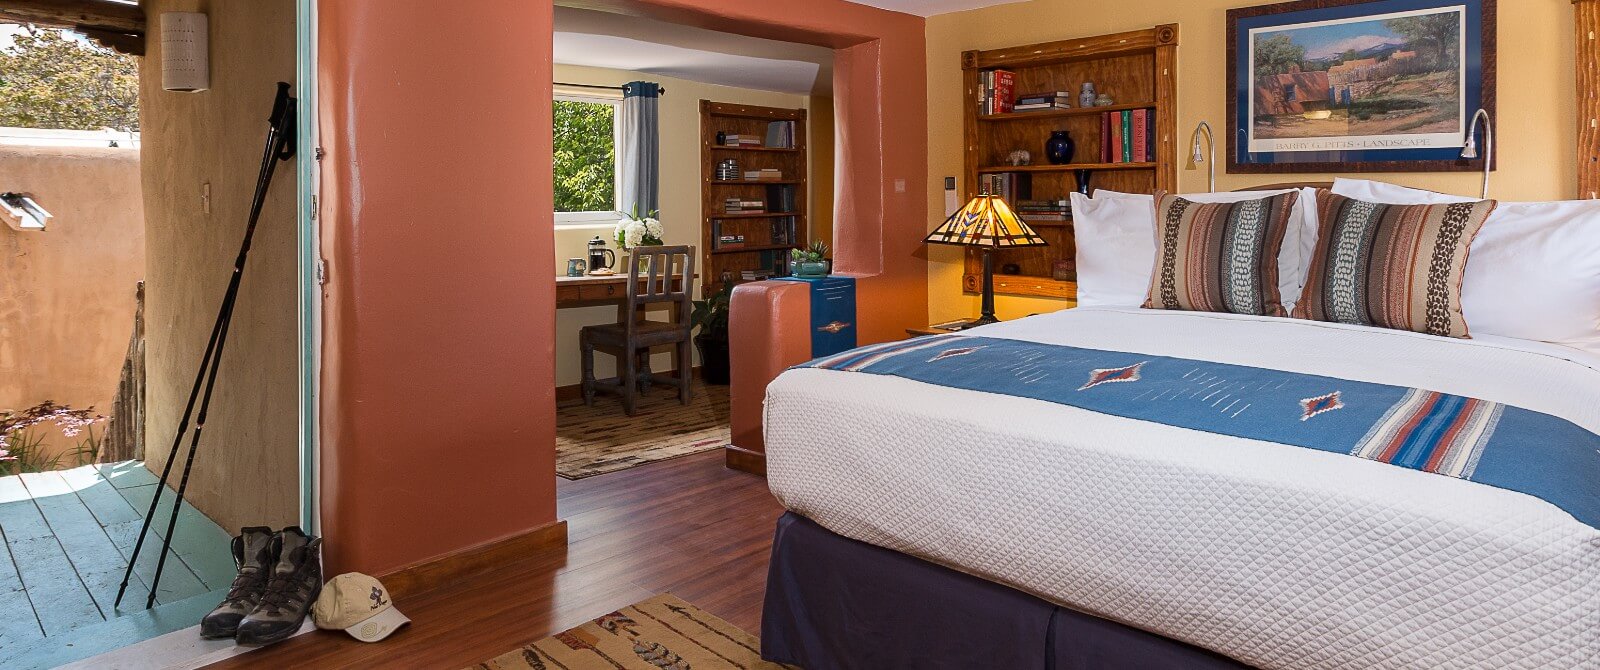 Queen sized bed with nightstands, desk and sitting room in distance, guest room door open revealing porch and entrance from the Inn's Courtyard.